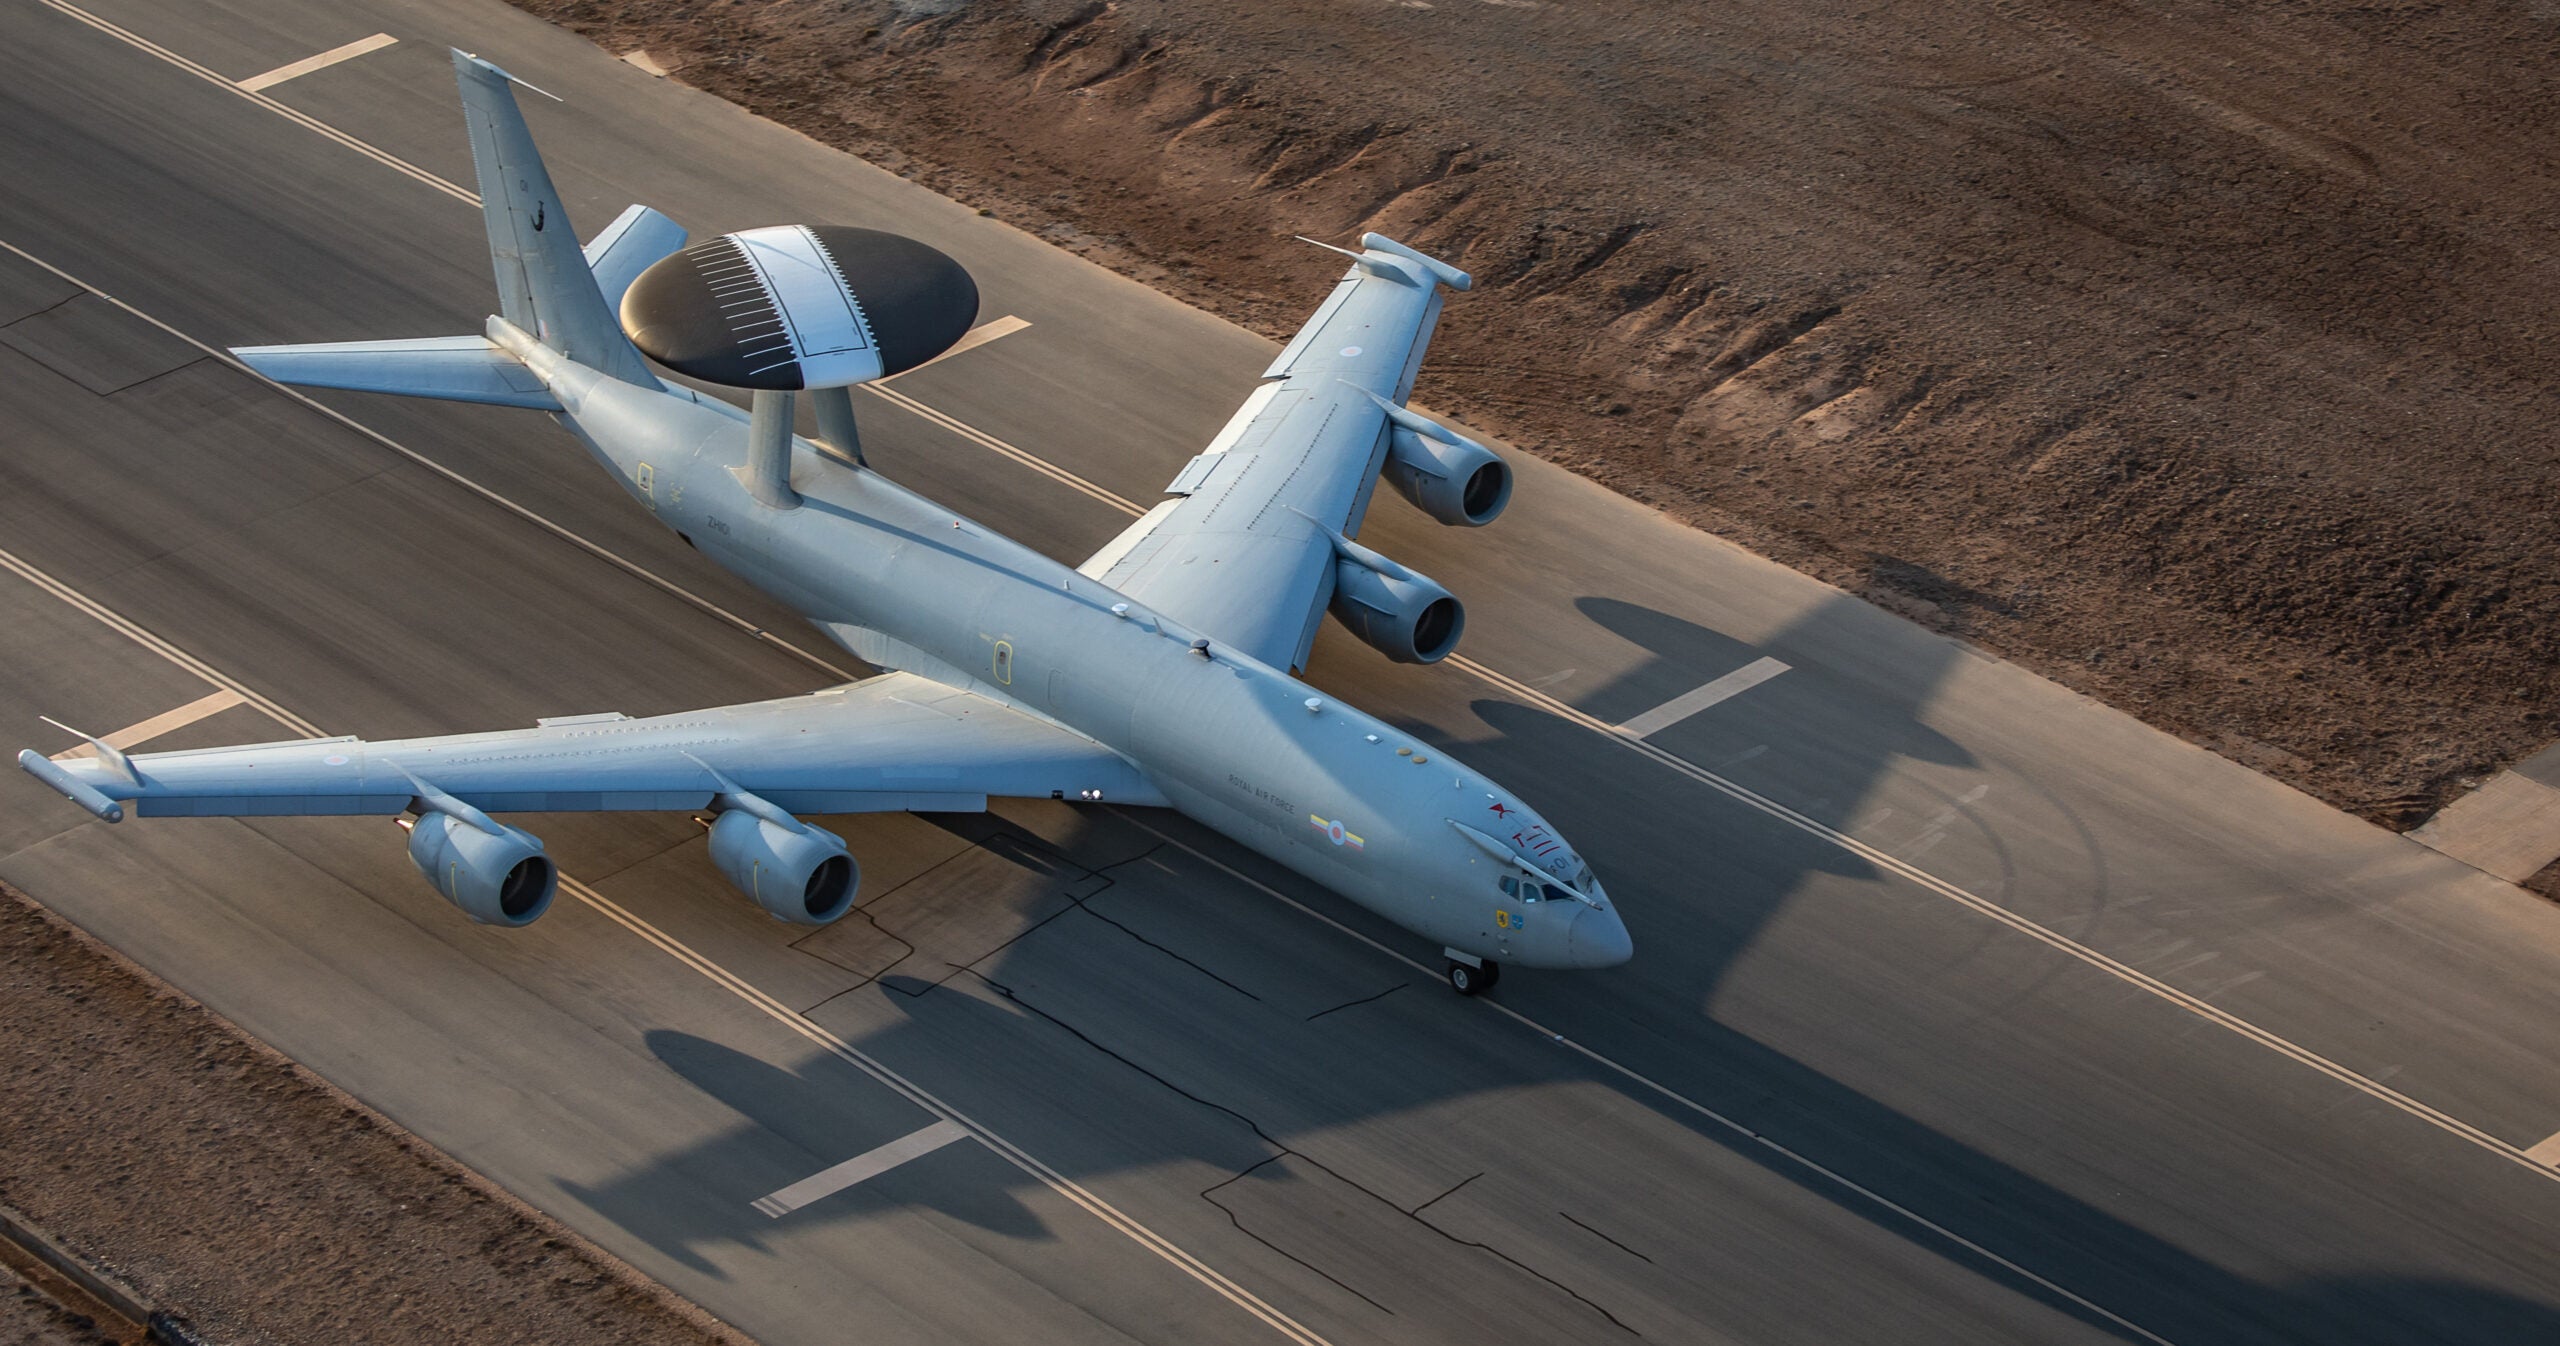 Images of the Boeing E-3D Sentry, aka AWACS, conducting a take-off and a fly-through at RAF Akrotiri.

This was before flying a mission in support of Operation Shader captured from a helicopter flown by 84 Squadron.

The E-3D is in RAF Akrotiri flying it’s final missions supporting Operations before returning to its home unit, RAF Waddington.